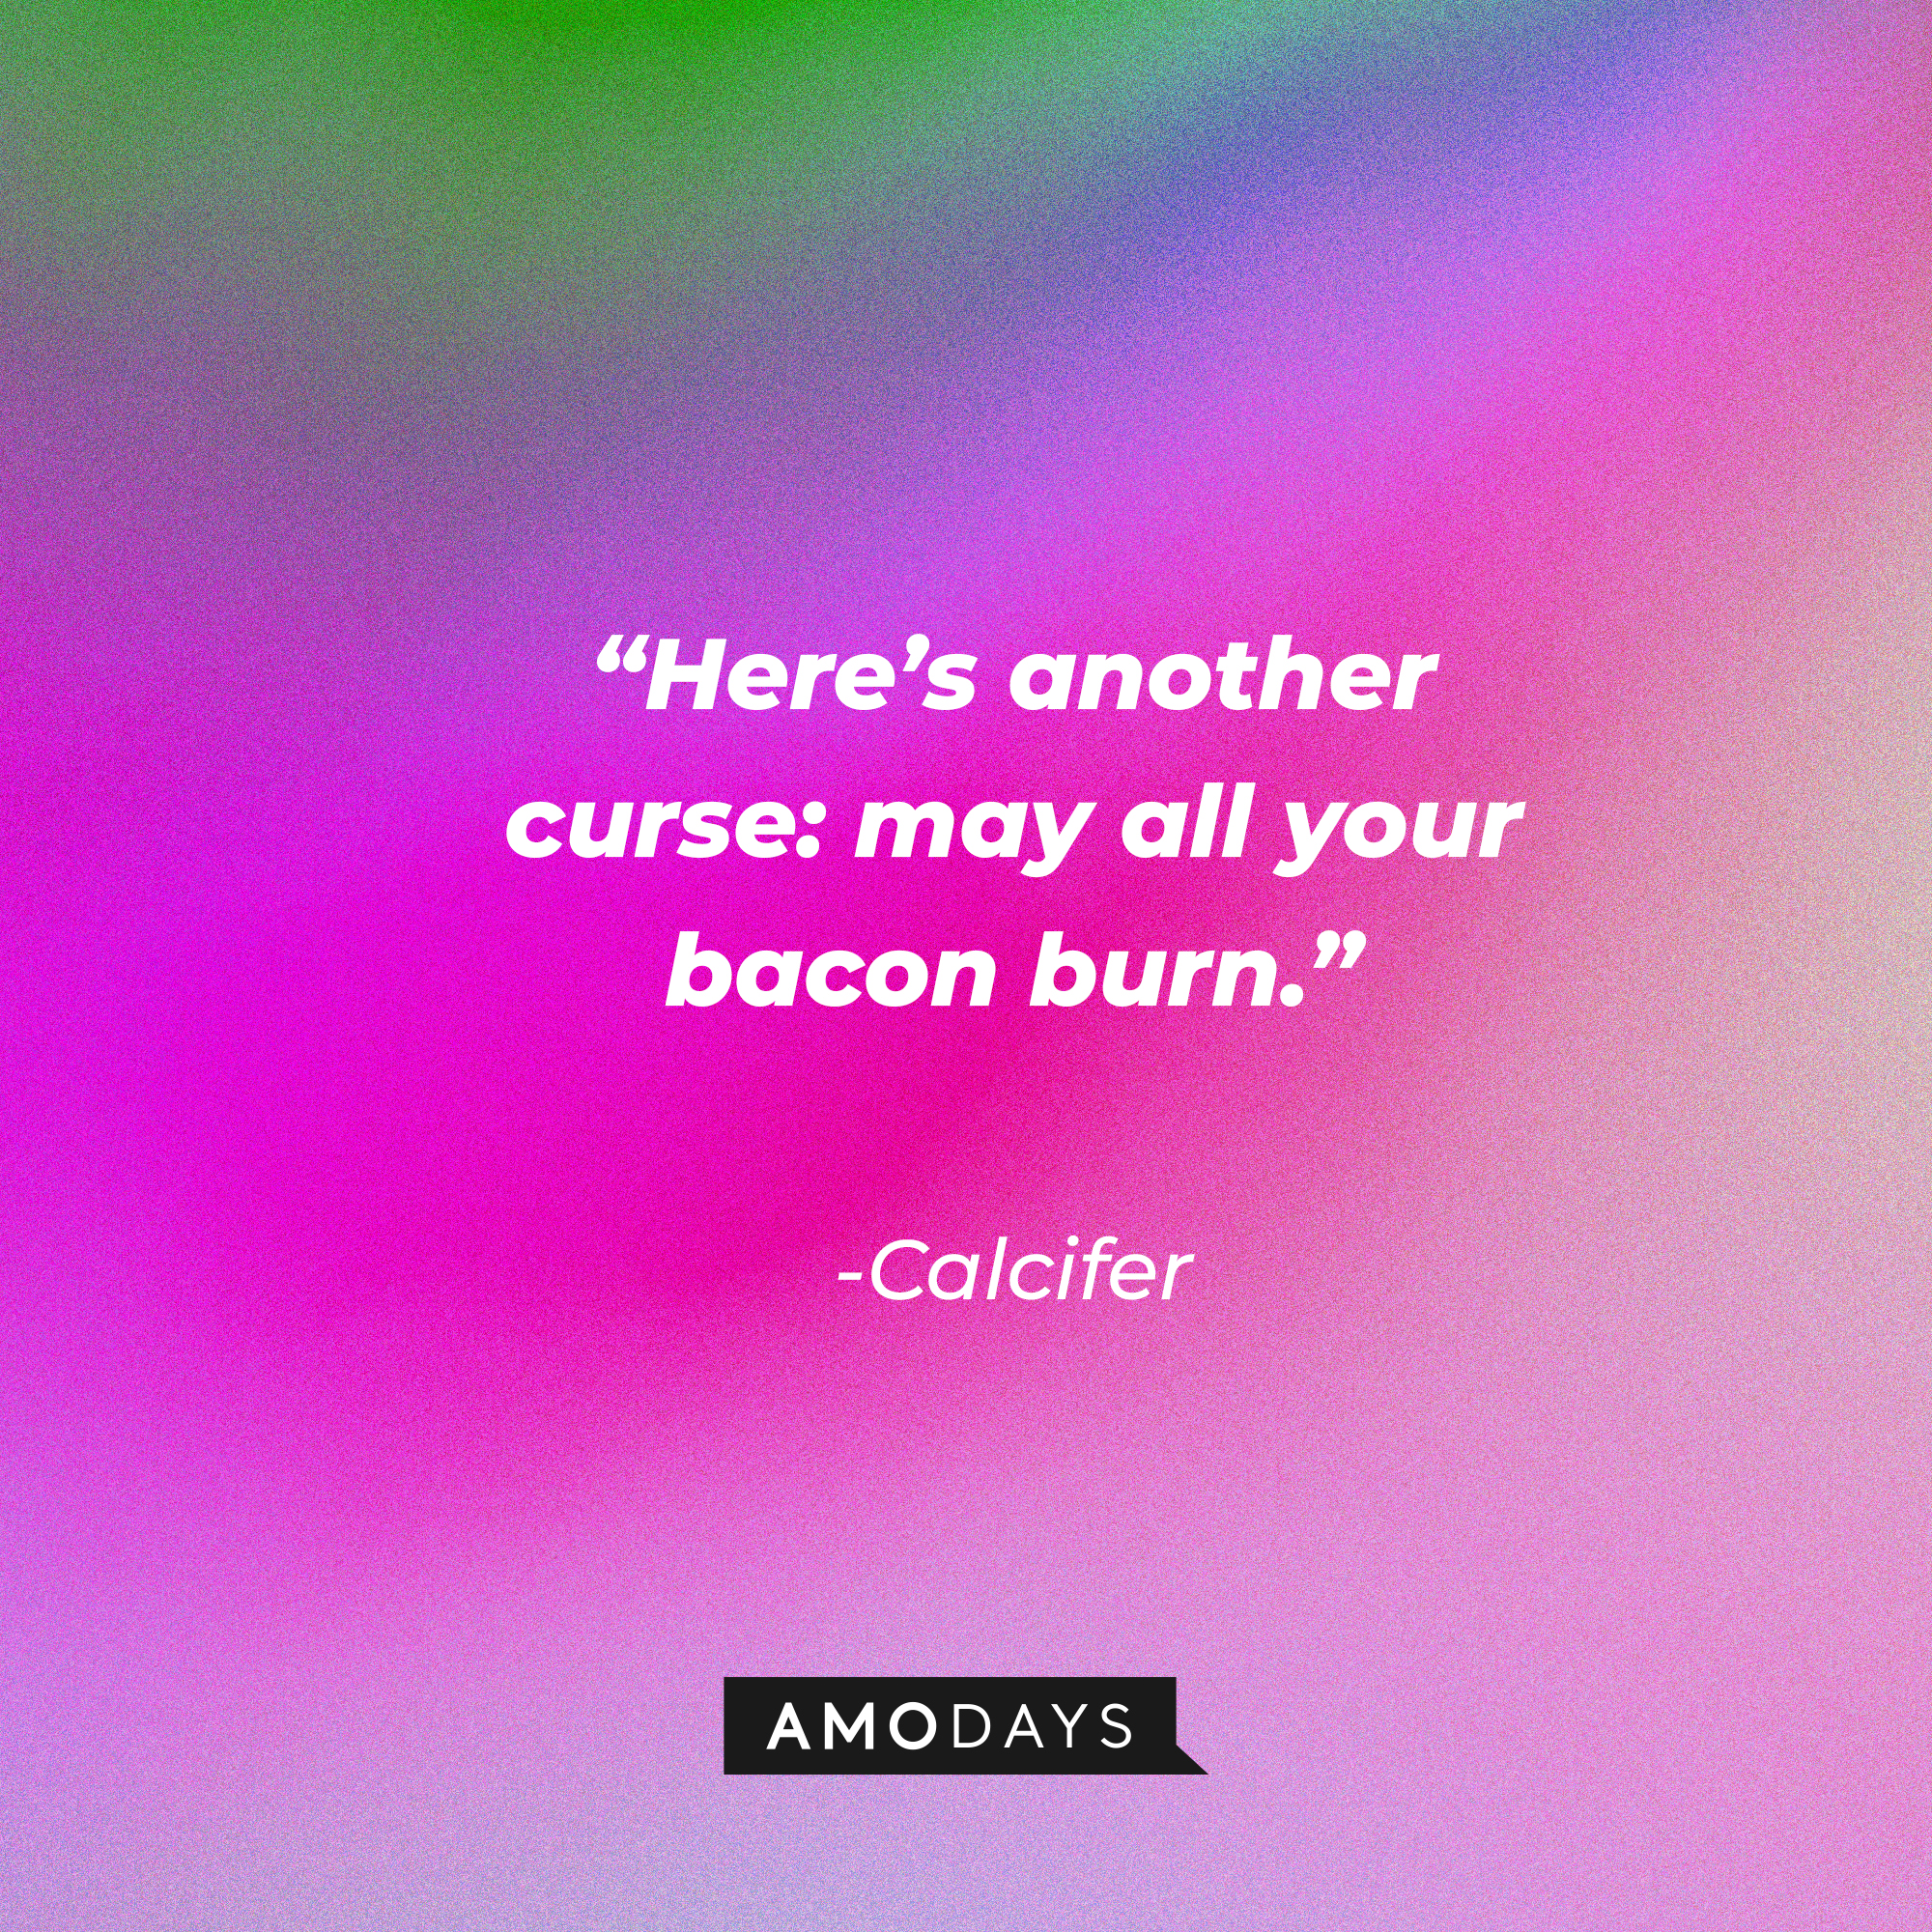 Calcifer’s quote: ”Here’s another curse: may all your bacon burn.” | Source: AmoDays